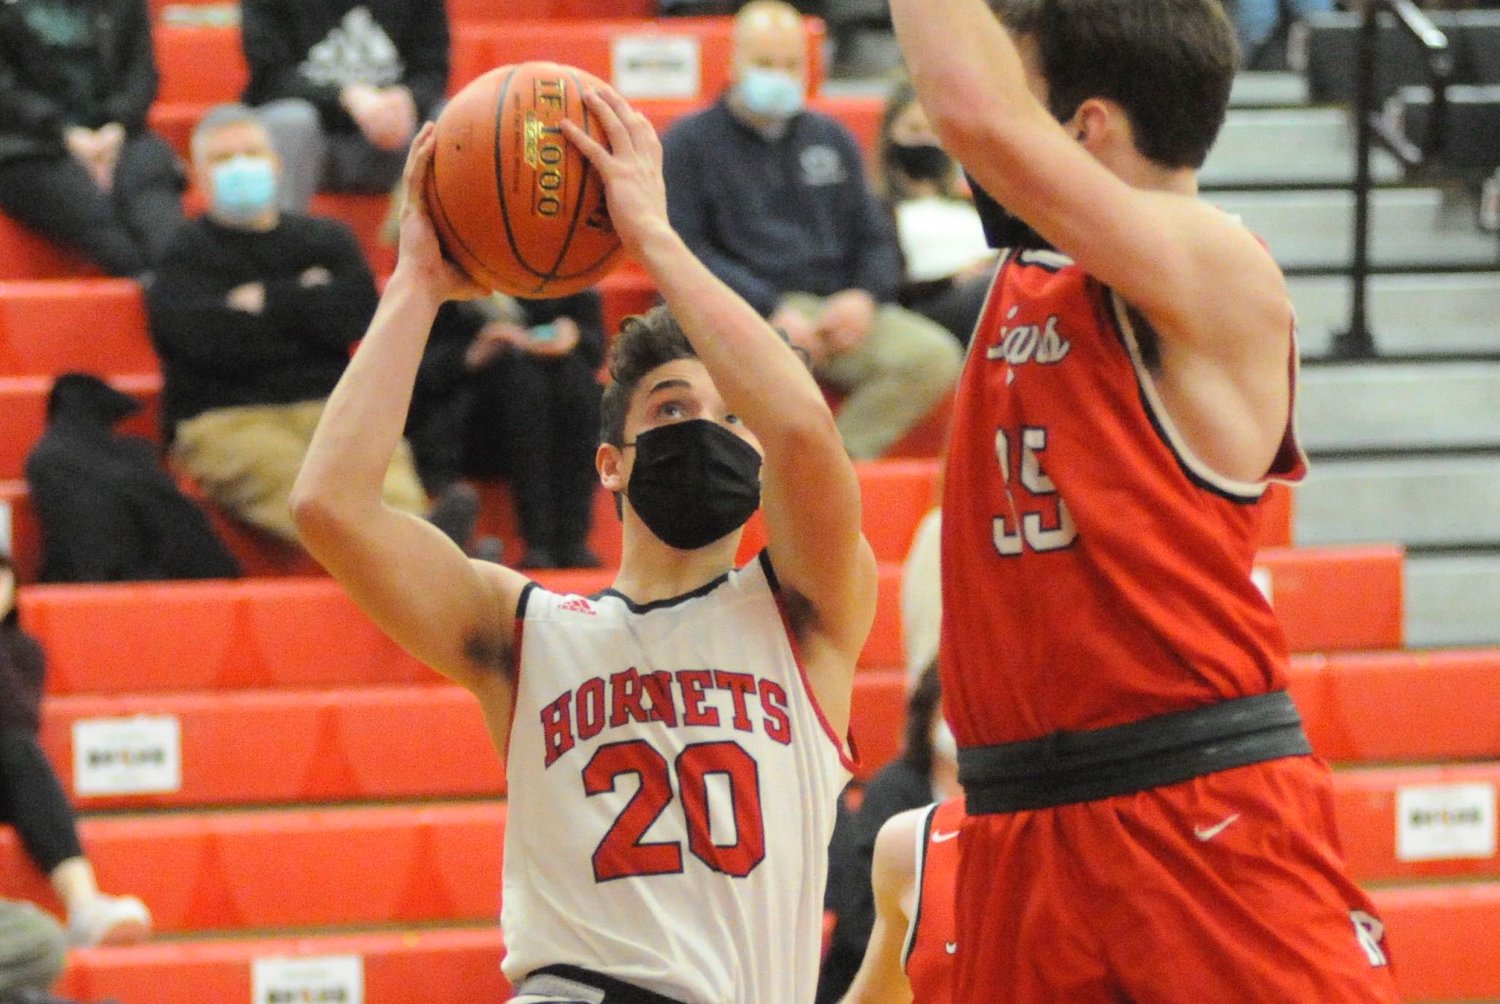 Honesdale’s Sam Jones scored four points; Kyle Serine added eight points to the Trojans’ 68-35 win.